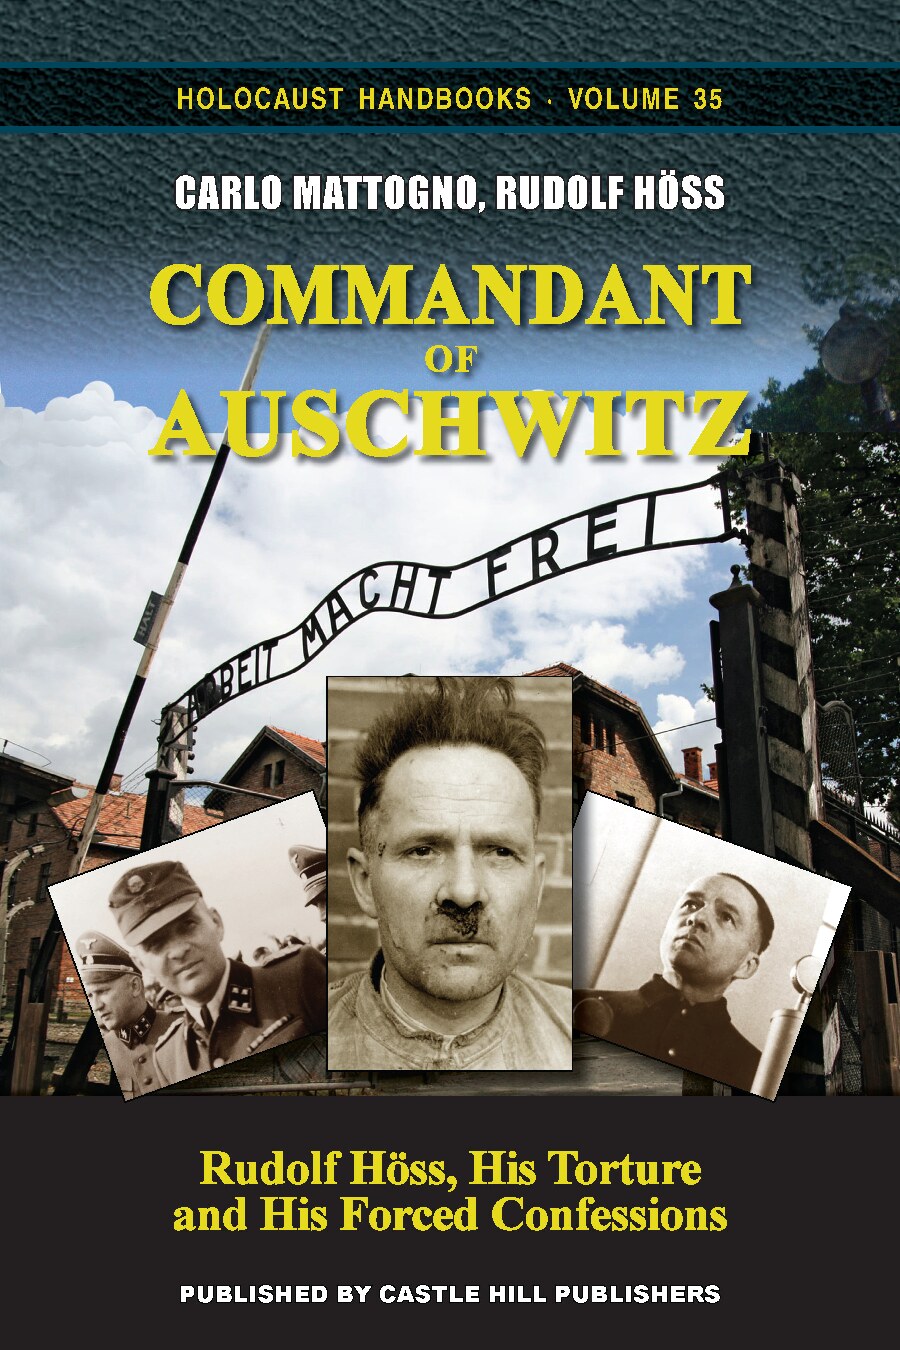 Commandant of Auschwitz: Rudolf Höss, His Torture and His Forced Confessions